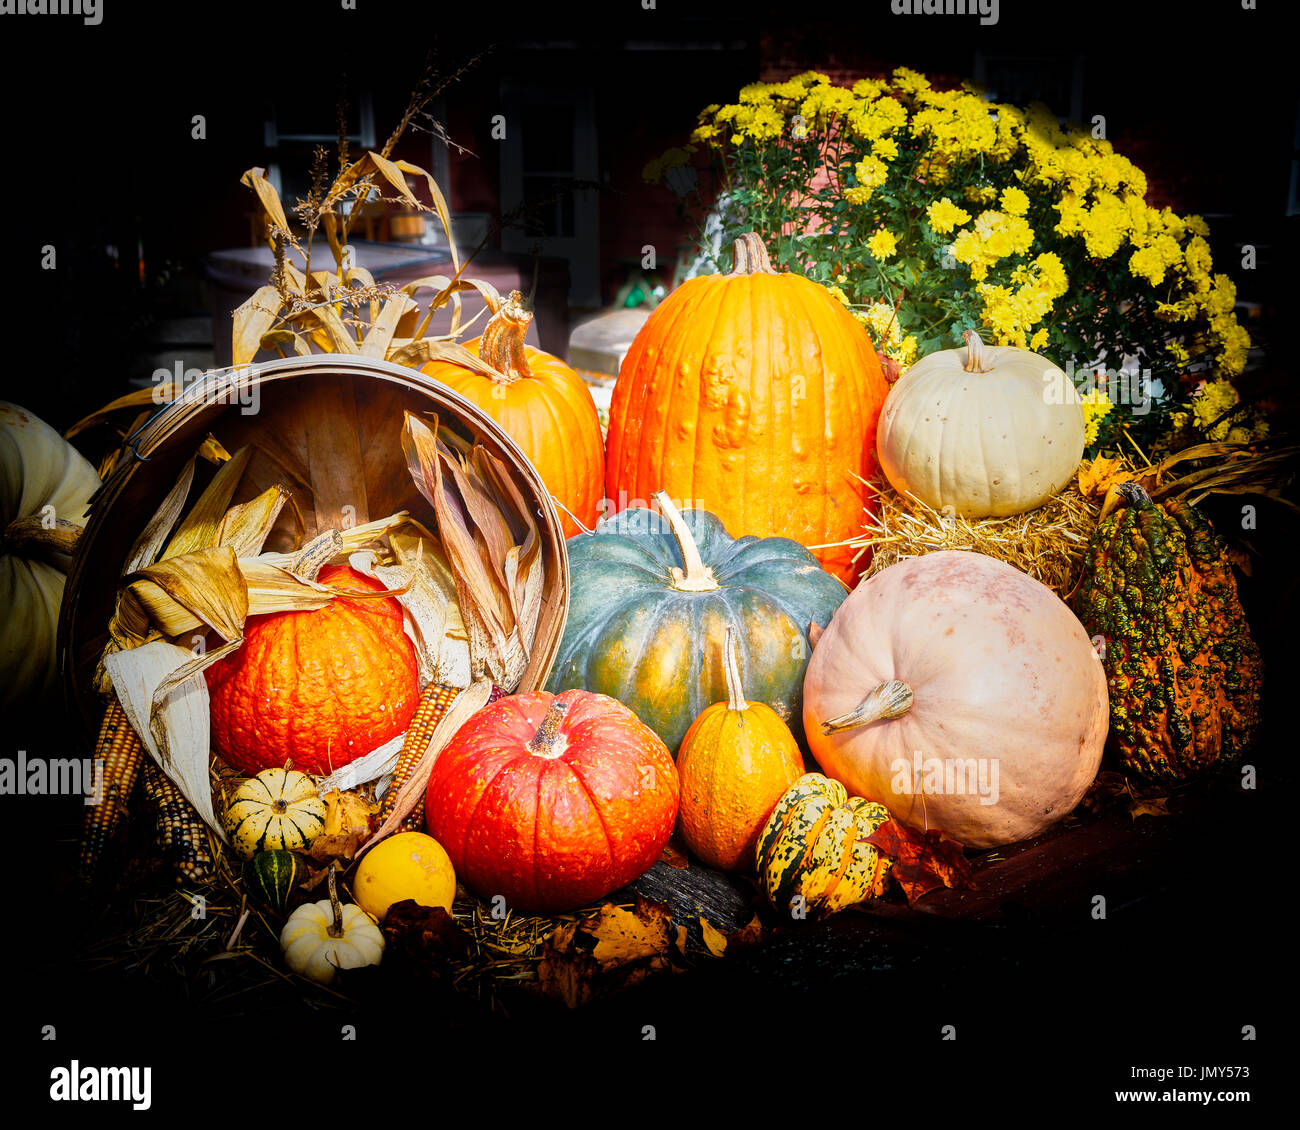 Harvest Pumpkins and Gourds Stock Photo